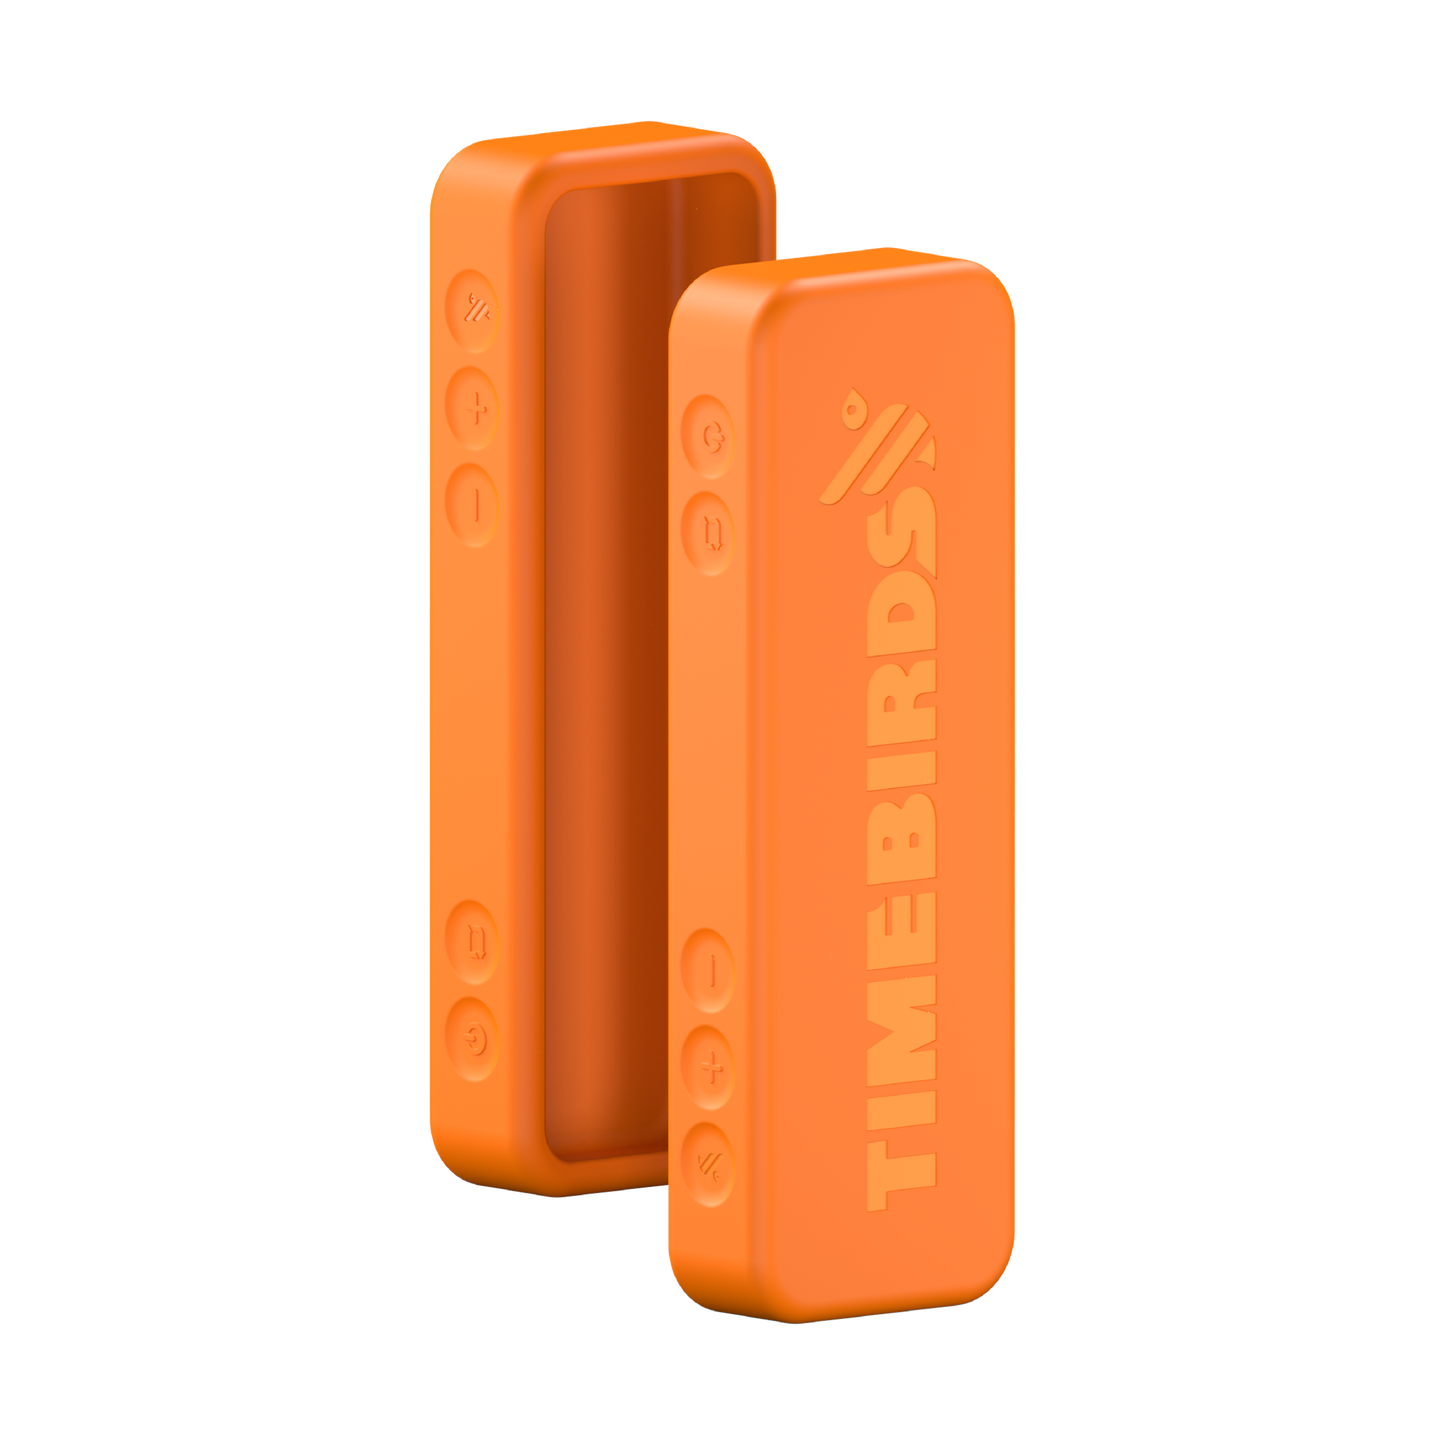 Timebirds Case - All out Orange